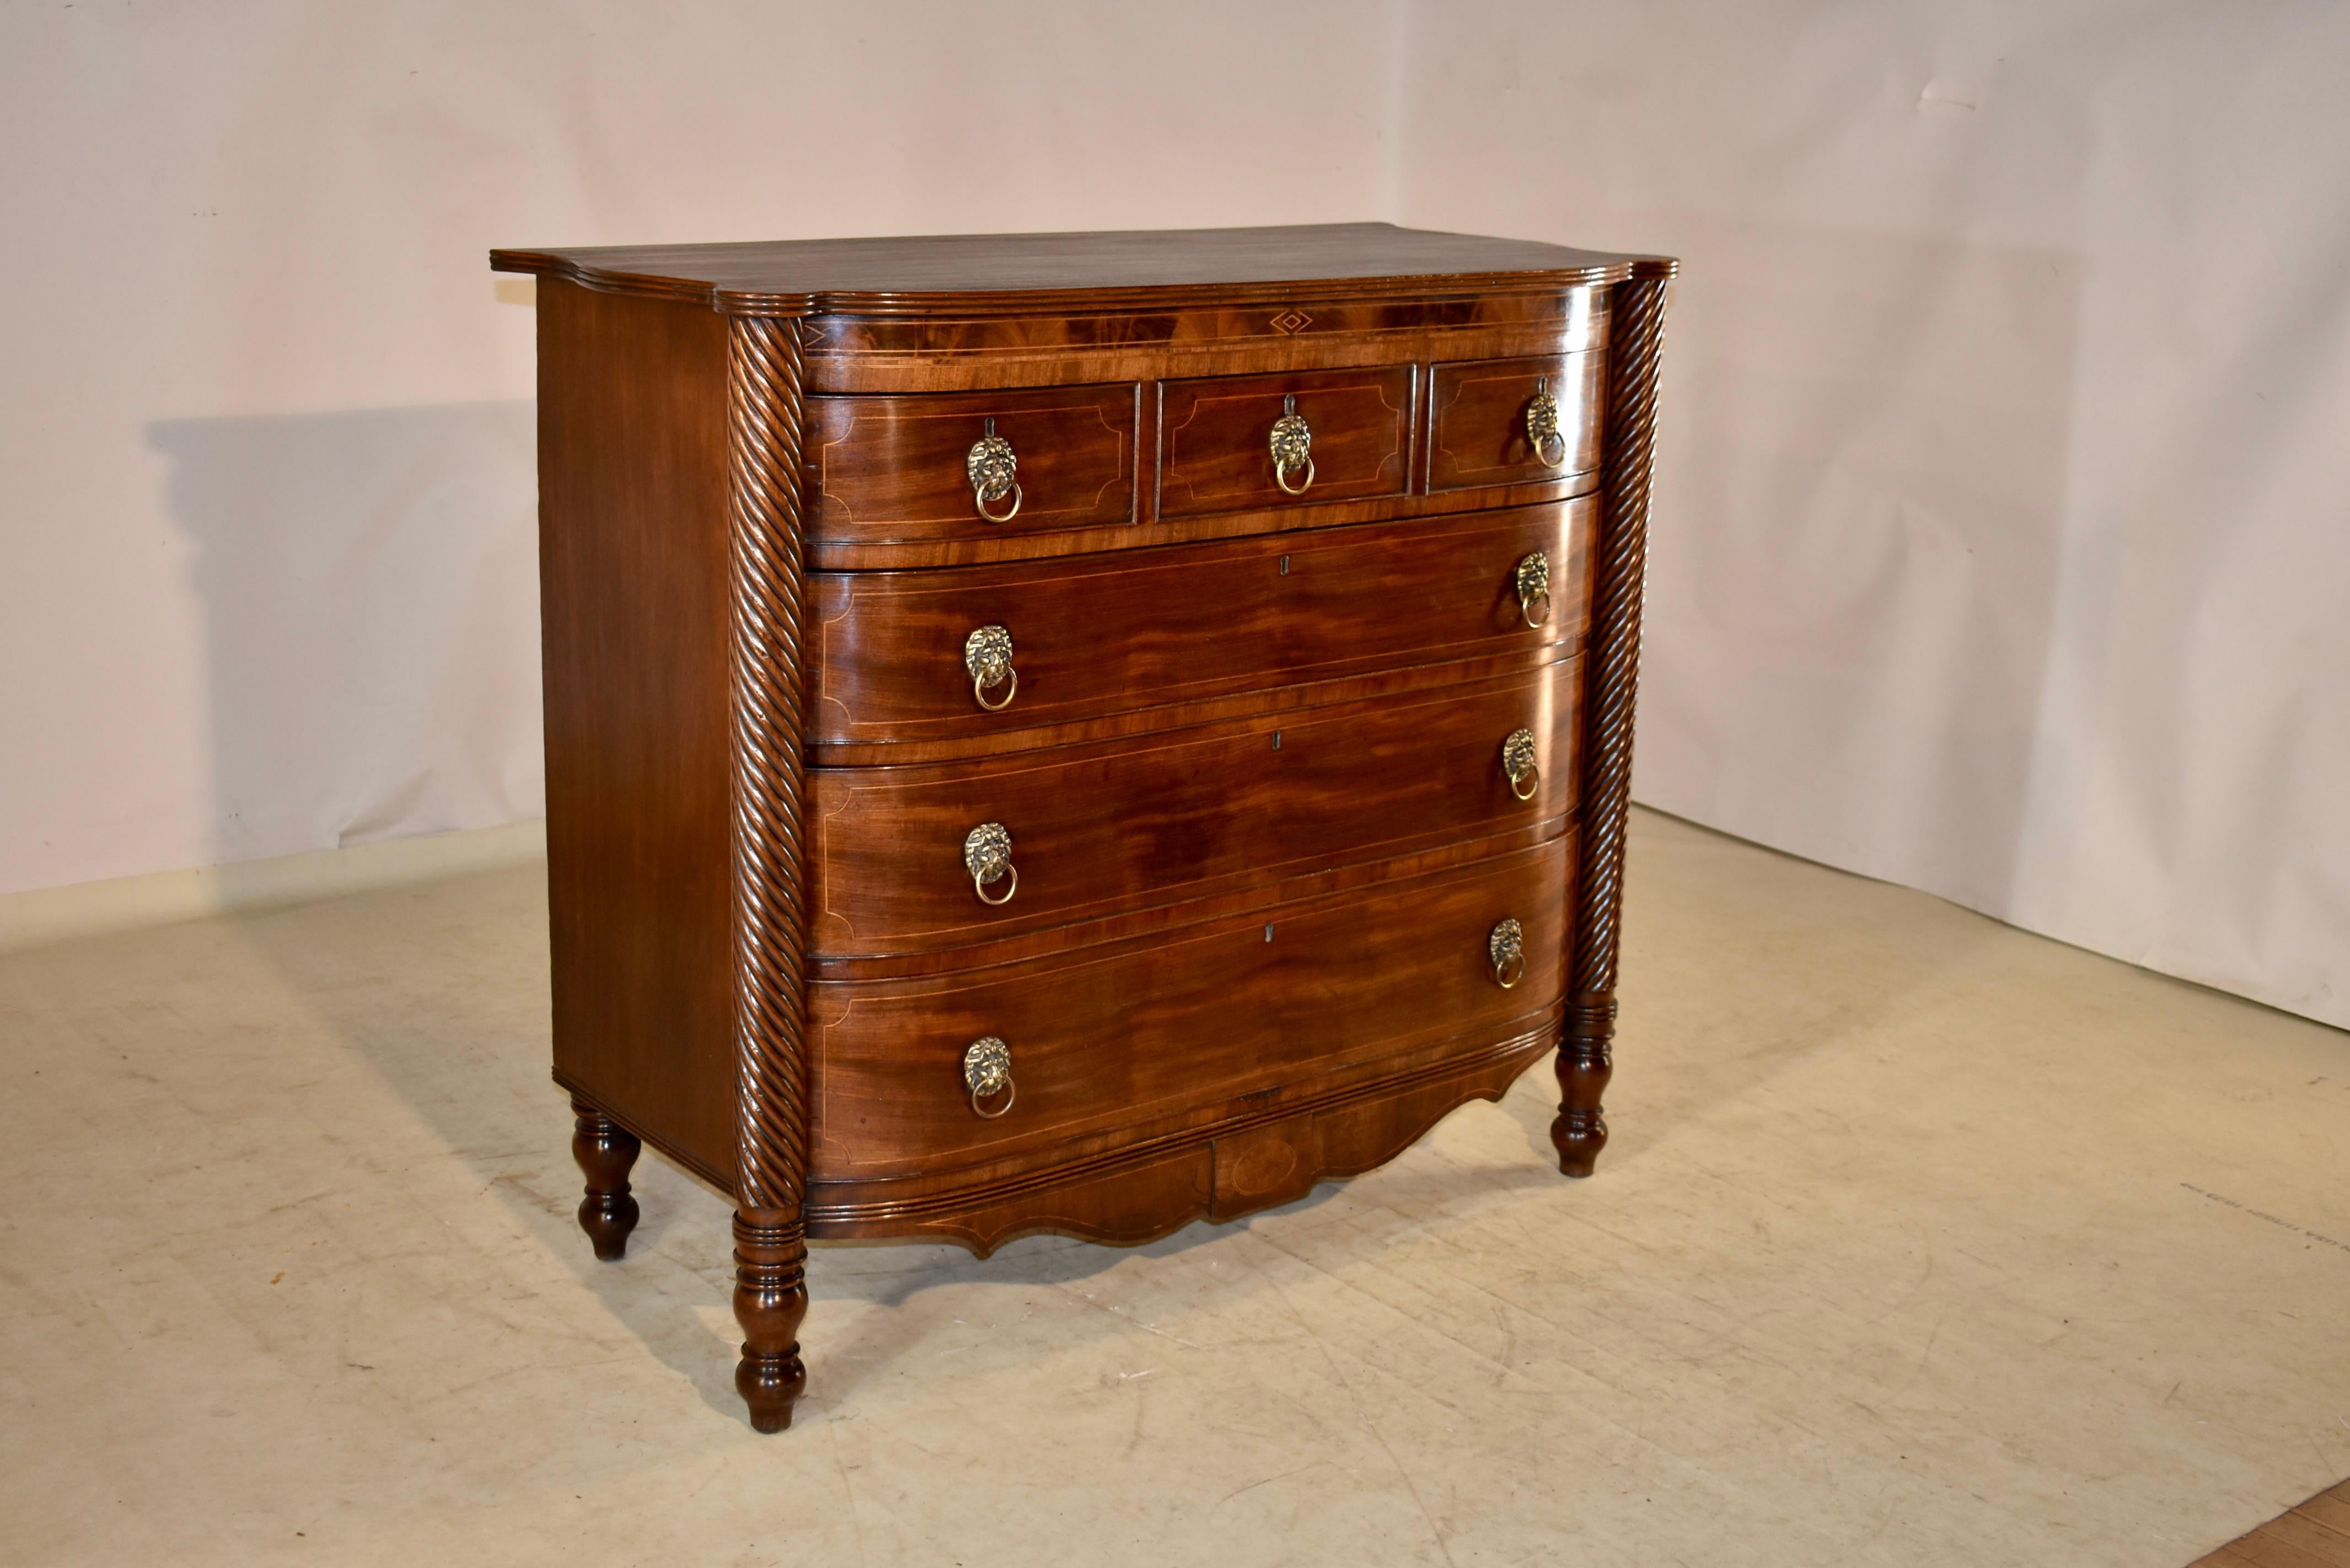 Early 19th century mahogany bow front chest of drawers from England. The top is made from a single plank, which features wonderful graining and scalloped edging, which also feature routed decoration. The case is simple on the sides, and are also